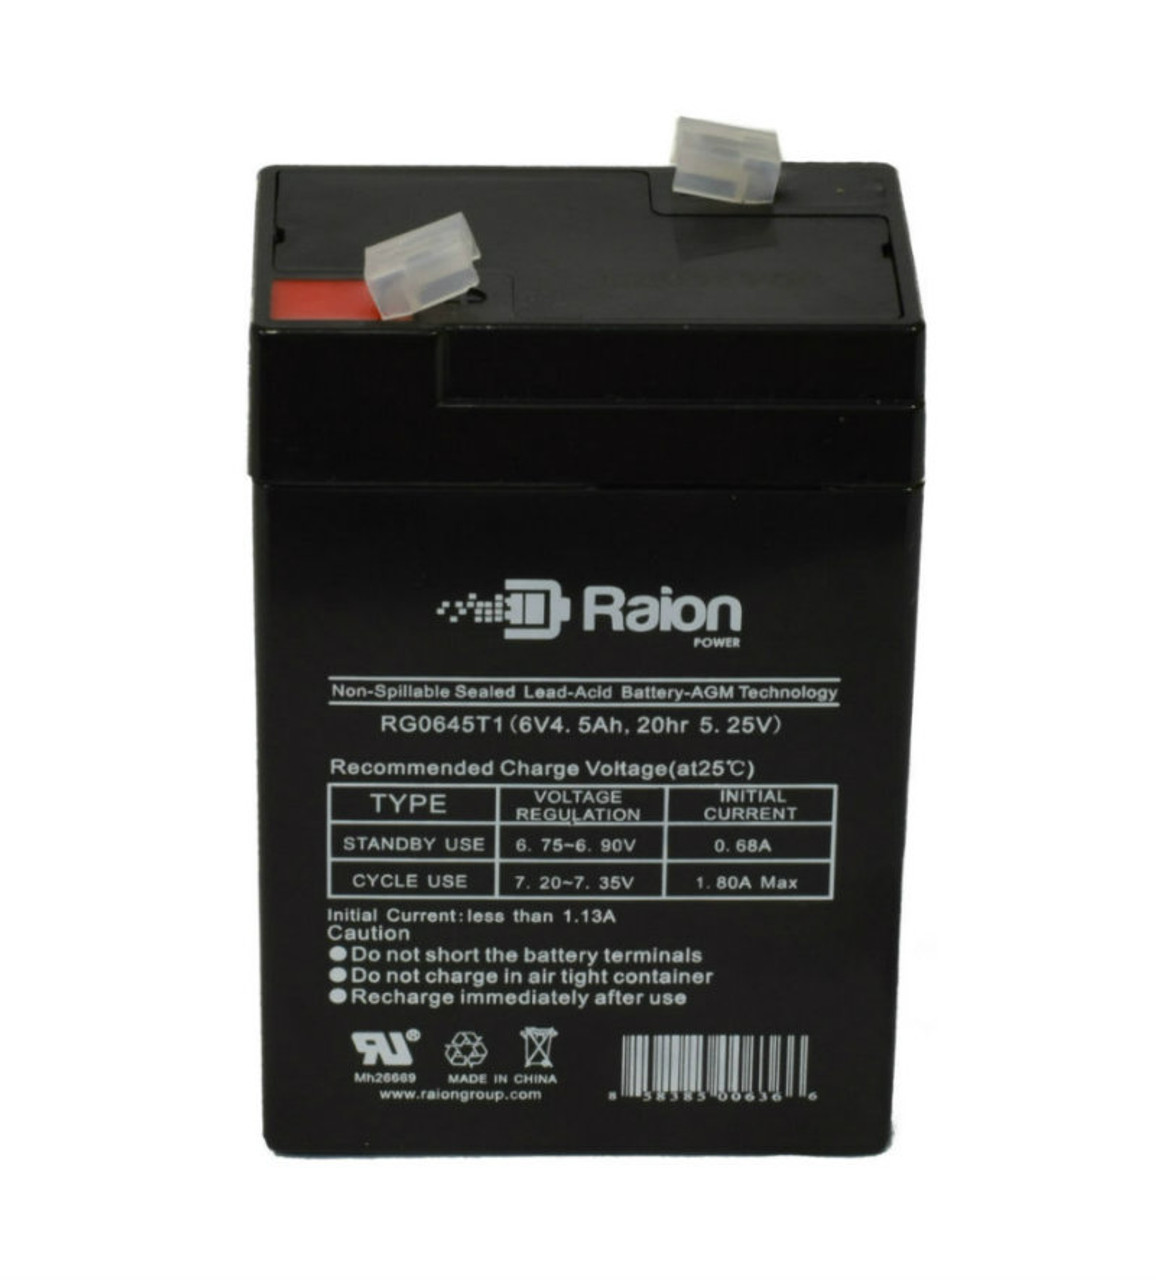 Raion Power RG0645T1 Replacement Battery Cartridge for Lightalarms L1